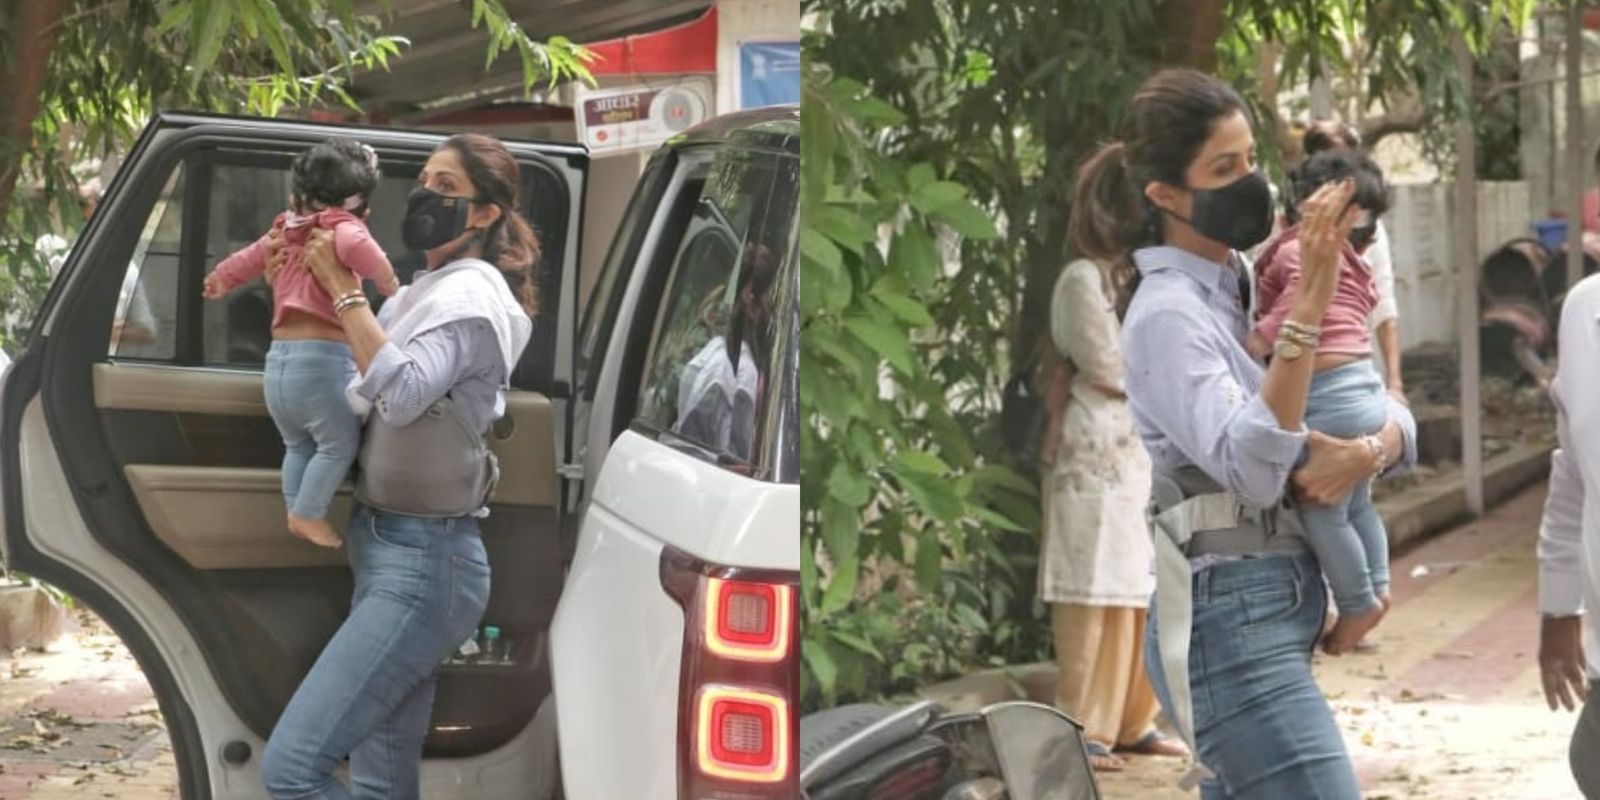 Shilpa Shetty's Daughter Samisha's Adorable Face Will Make Your Day, As The Actress Gets Clicked In Town With Her Baby Girl